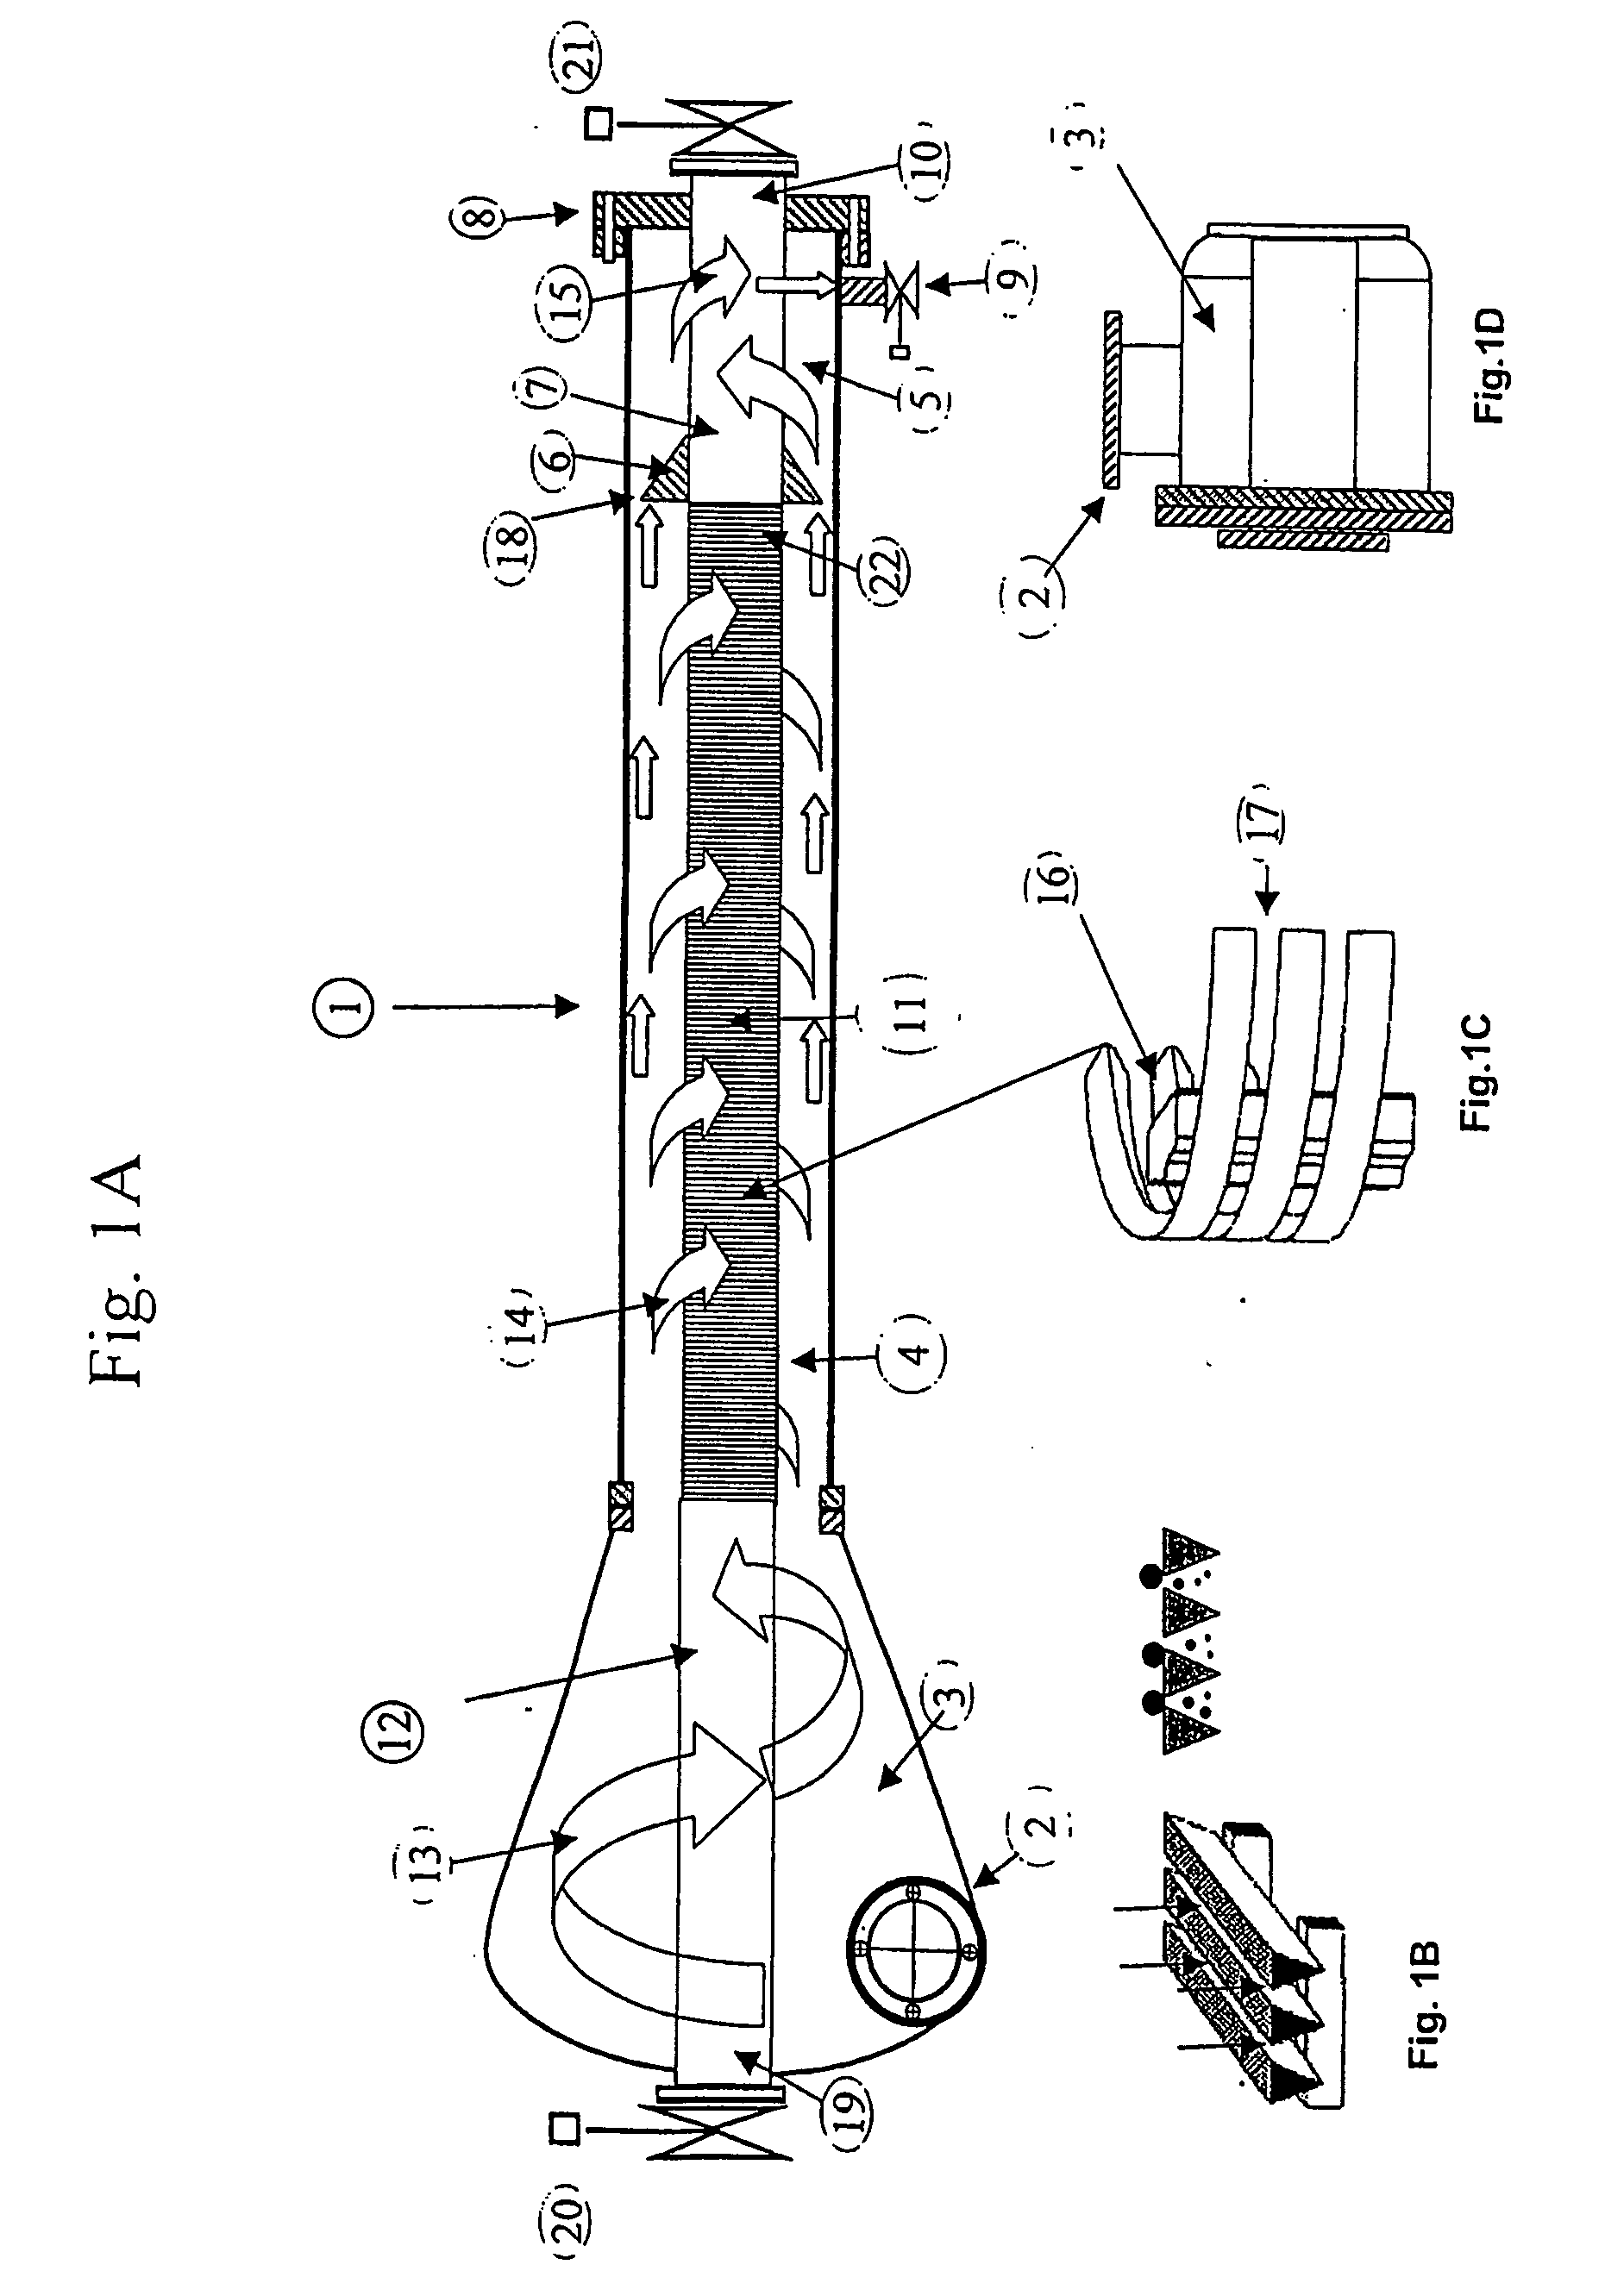 Apparatus and method for separating and filtering particles and organisms from flowing liquids